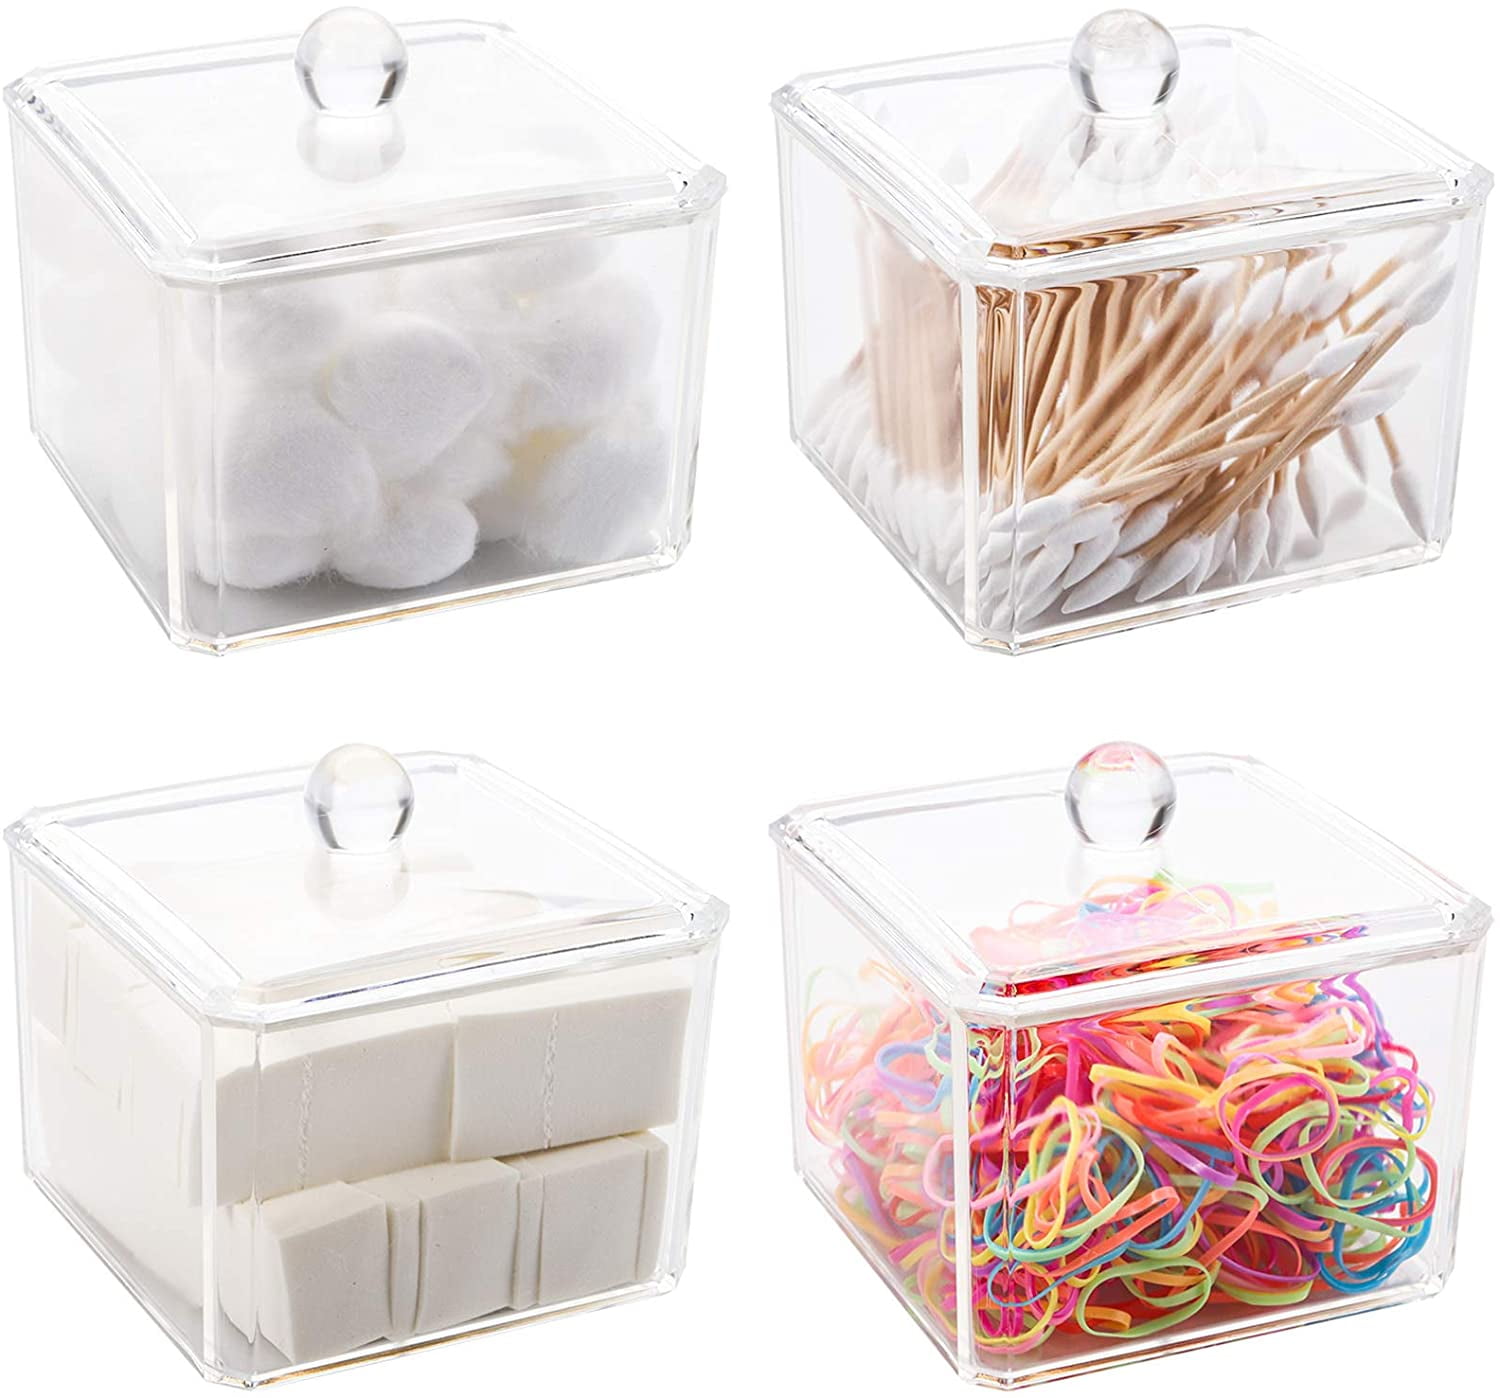 Clear Acrylic Cotton Pad Container Cotton Swab Organizer Qtip dispenser Vanity countertop Organizer Box for Bathroom Storage Canister Acrylic Cotton Swab Container Holder Canister 